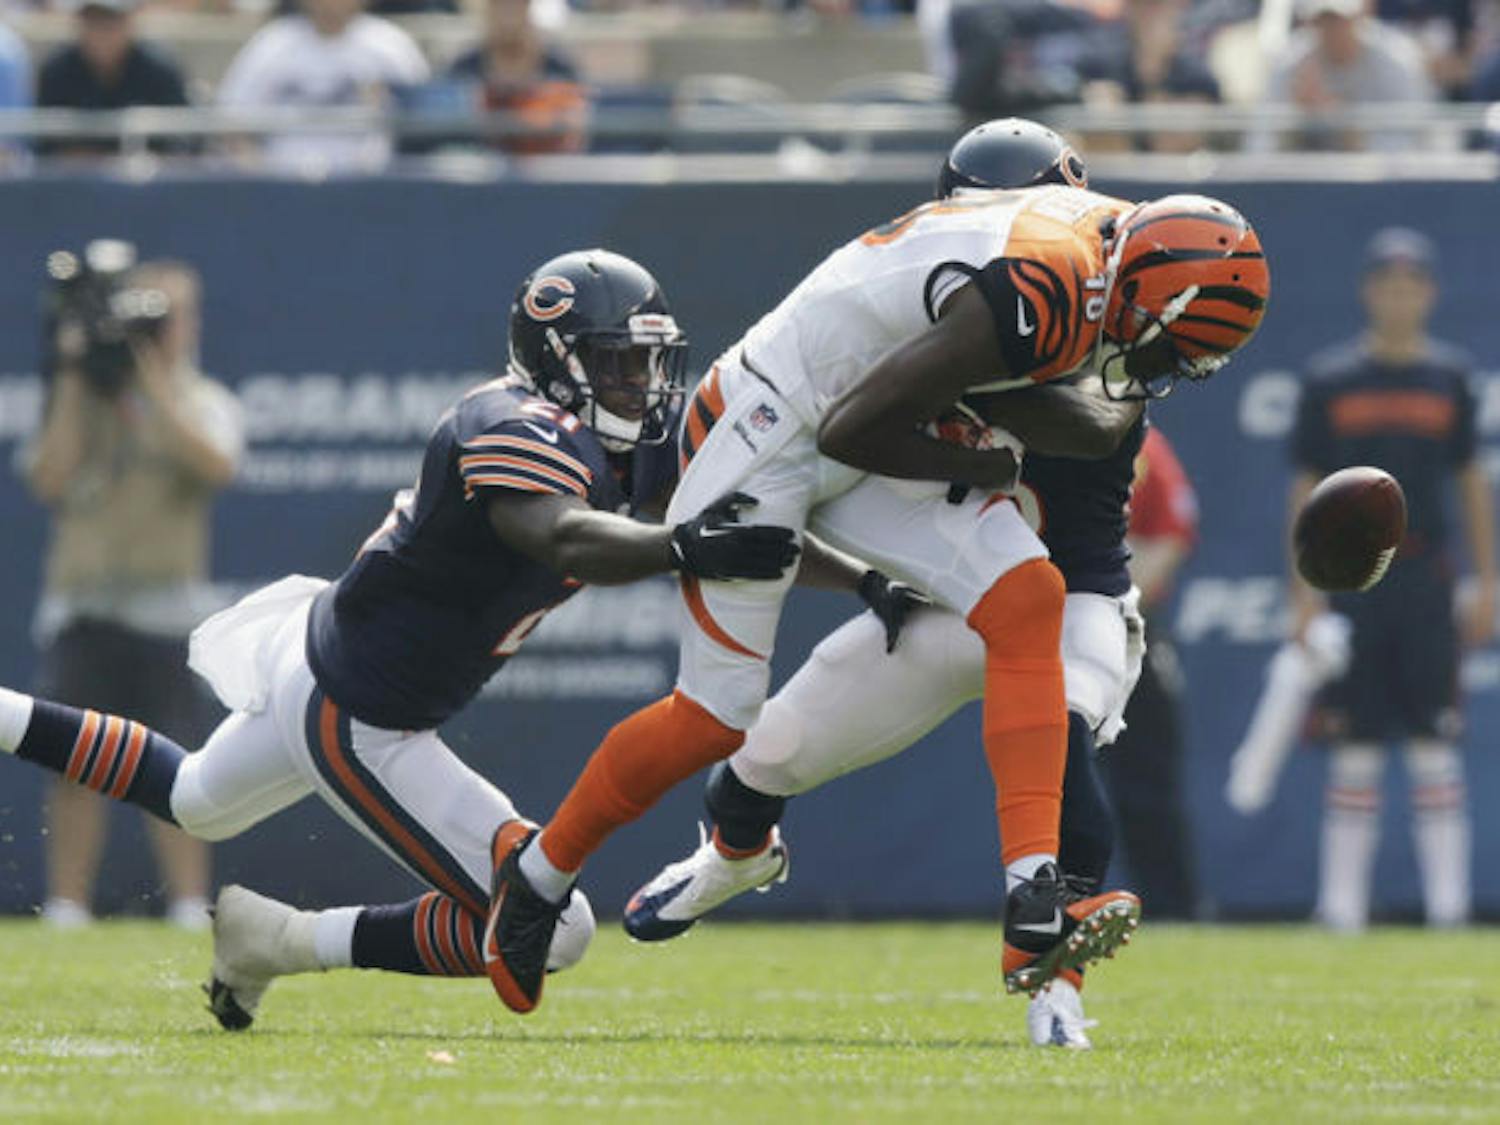 Cincinnati Bengals wide receiver A.J. Green (18) fumbles the ball as he is tackled by Chicago Bears strong safety Major Wright (21) and cornerback Tim Jennings on Sept. 8 at Soldier Field.&nbsp;